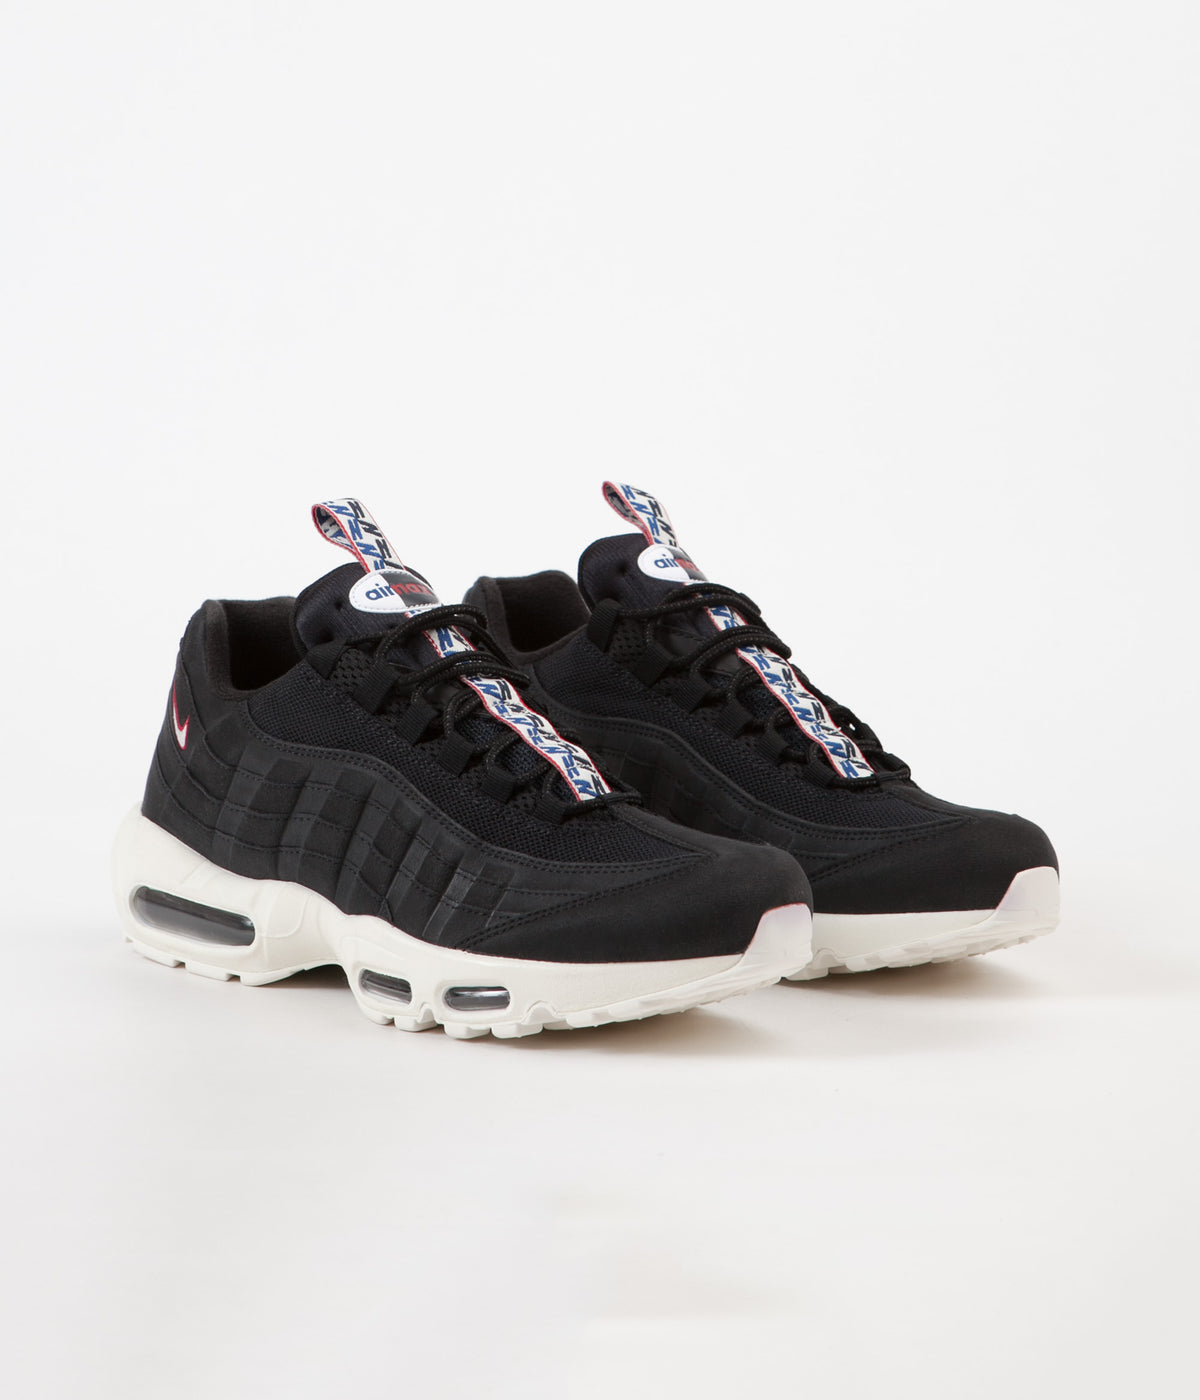 Lach Vooruitgaan Barry Nike Air Max 95 TT Shoes - Black / Sail - Gym Red | Always in Colour